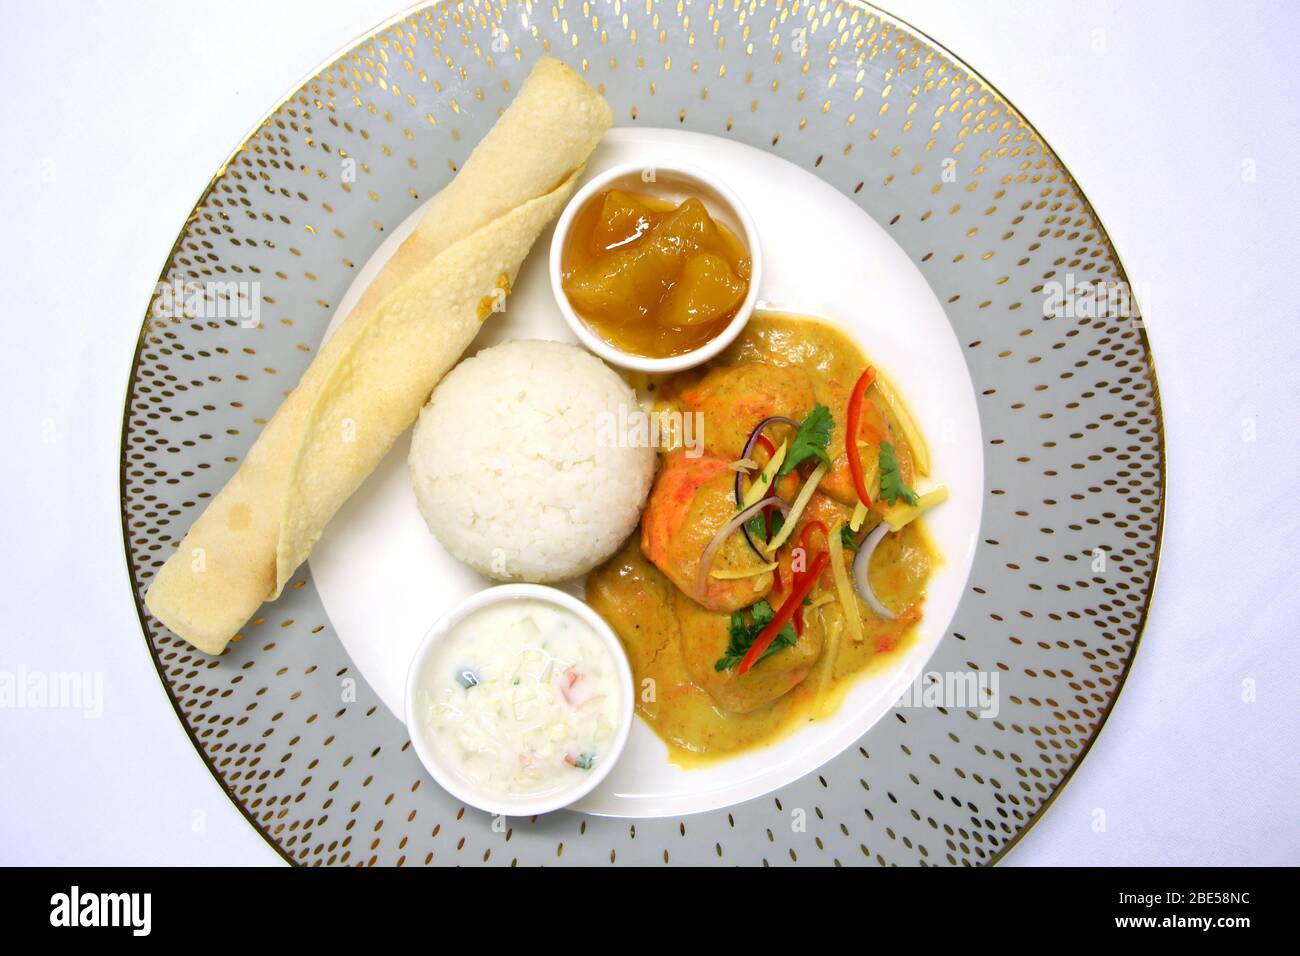 An Indian dinner ready to serve with chicken tikka masala, rice, chutney, raita, and a chapati bread, on a grey ornate plate & white table cloth. Stock Photo